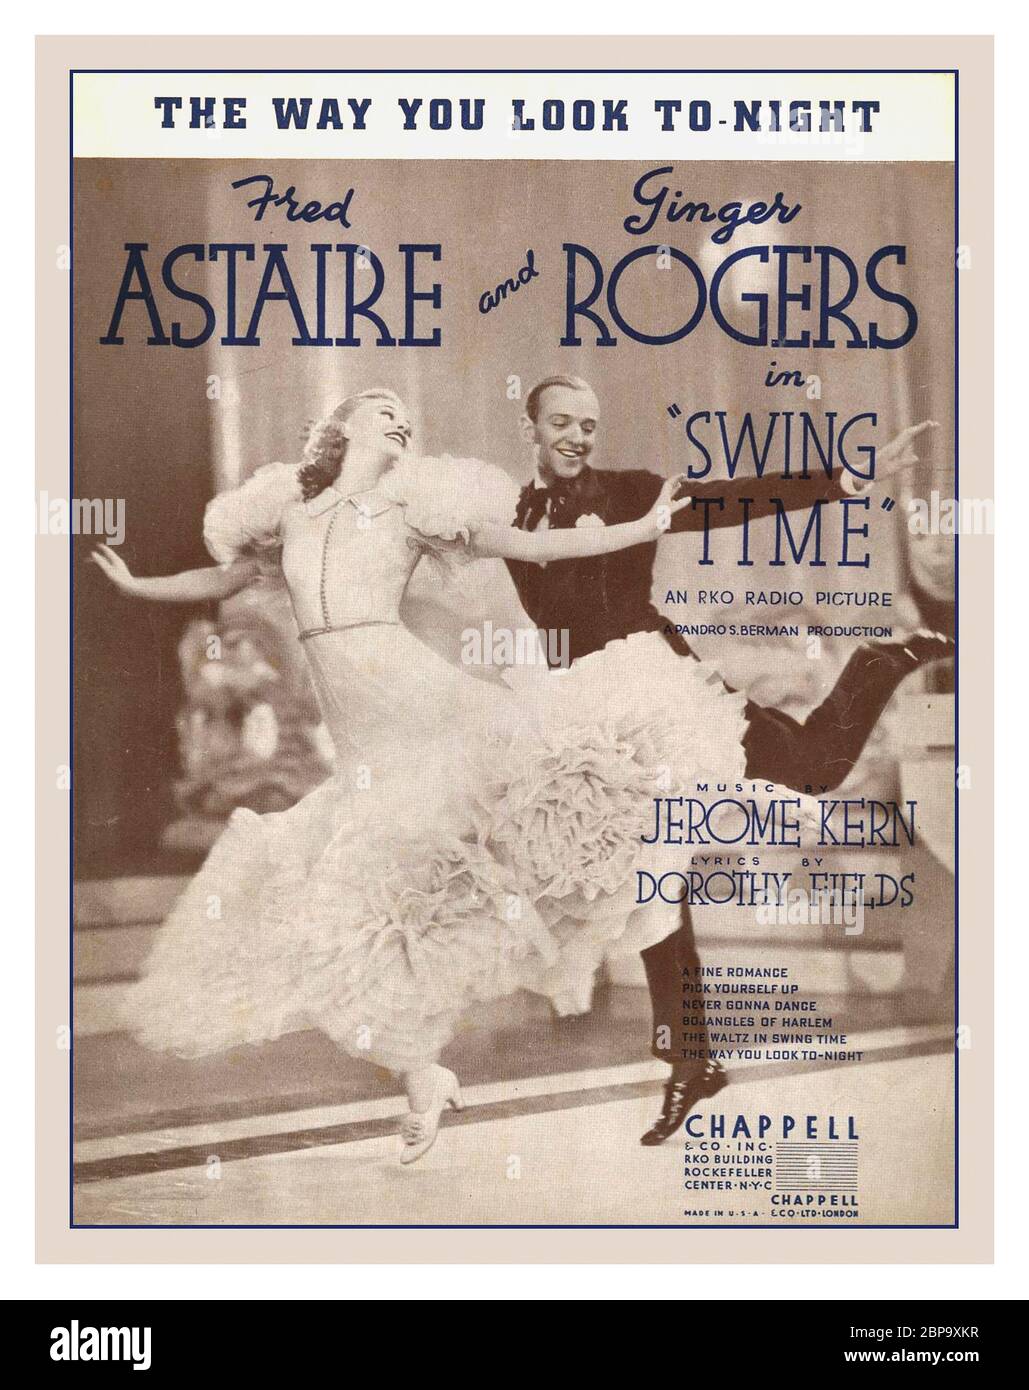 Fred Astaire & Ginger Rogers 1930's Cover Sheet music 'SWING TIME' for the song “The Way You Look Tonight,” with music by Jerome Kern and lyrics by Dorothy Fields. It was published by Chappell and Co., Inc. in New York, New York in 1936. This song was featured in the 1936 RKO Radio Pictures musical comedy film 'Swing Time', directed by George Stevens and starred Fred Astaire and Ginger Rogers. The cover features a still from the film of stars Fred Astaire and Ginger Rogers. 1936 Stock Photo